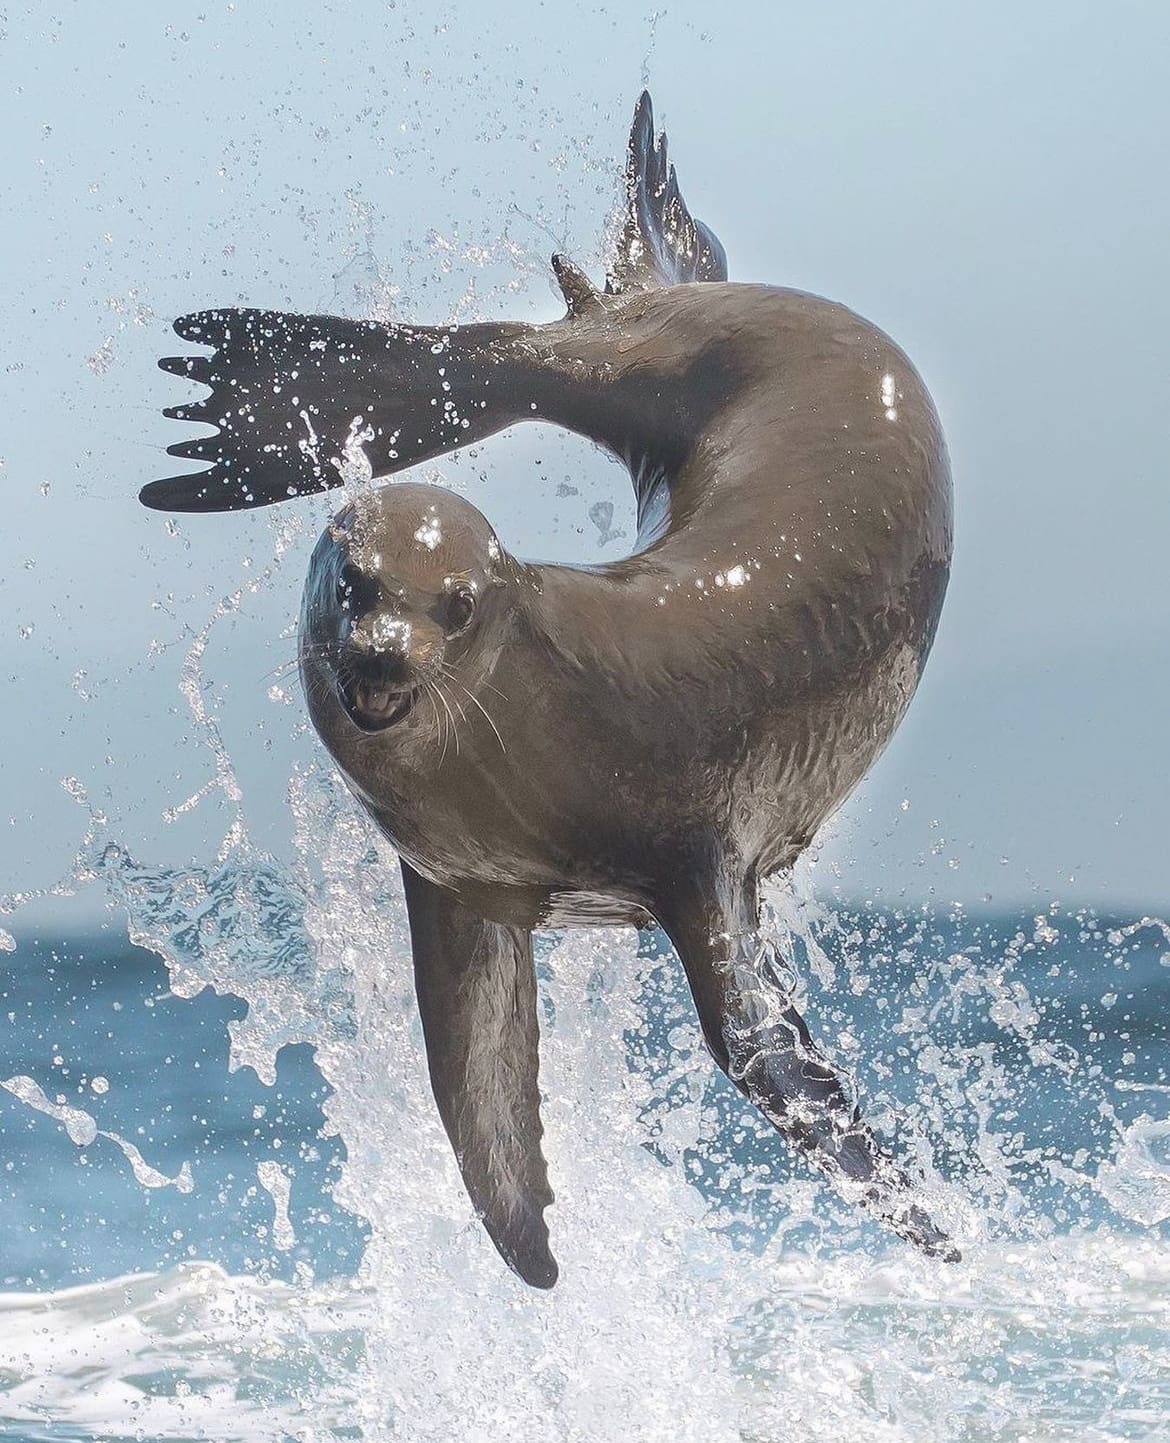 Sea lion jumping out the water